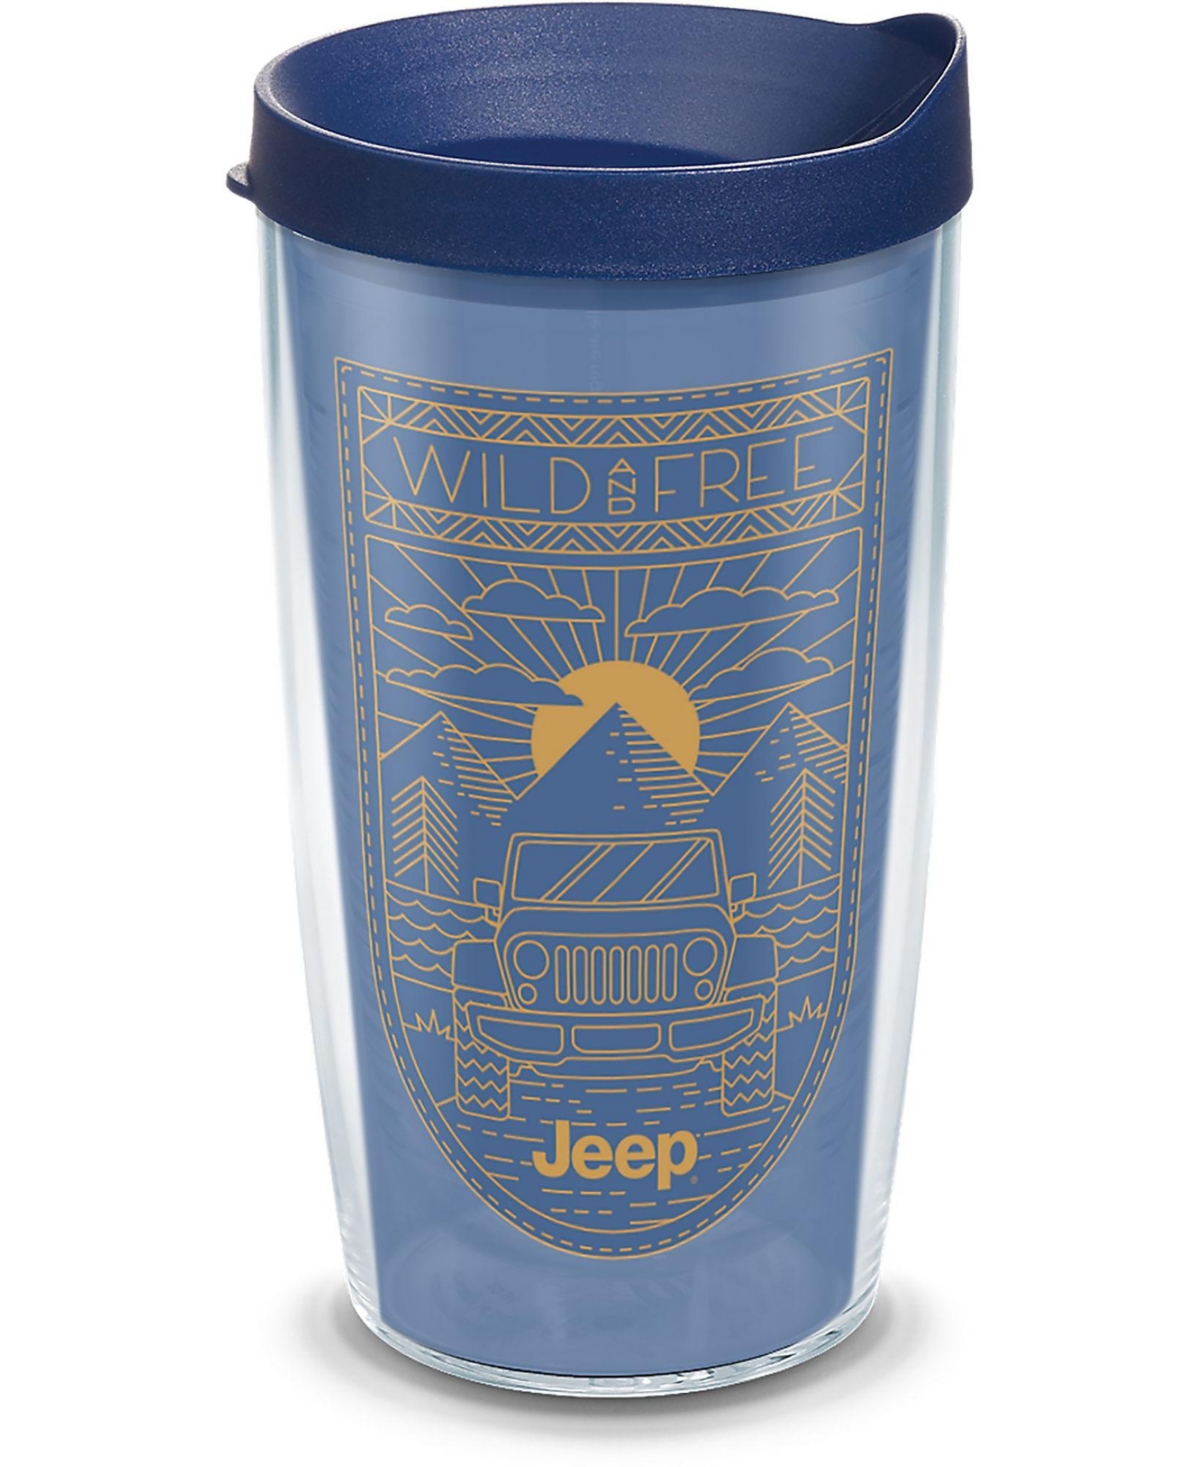 Tervis Tumbler Tervis Jeep Wild And Free Made In Usa Double Walled Insulated Tumbler Travel Cup Keeps Drinks Cold & In Open Miscellaneous